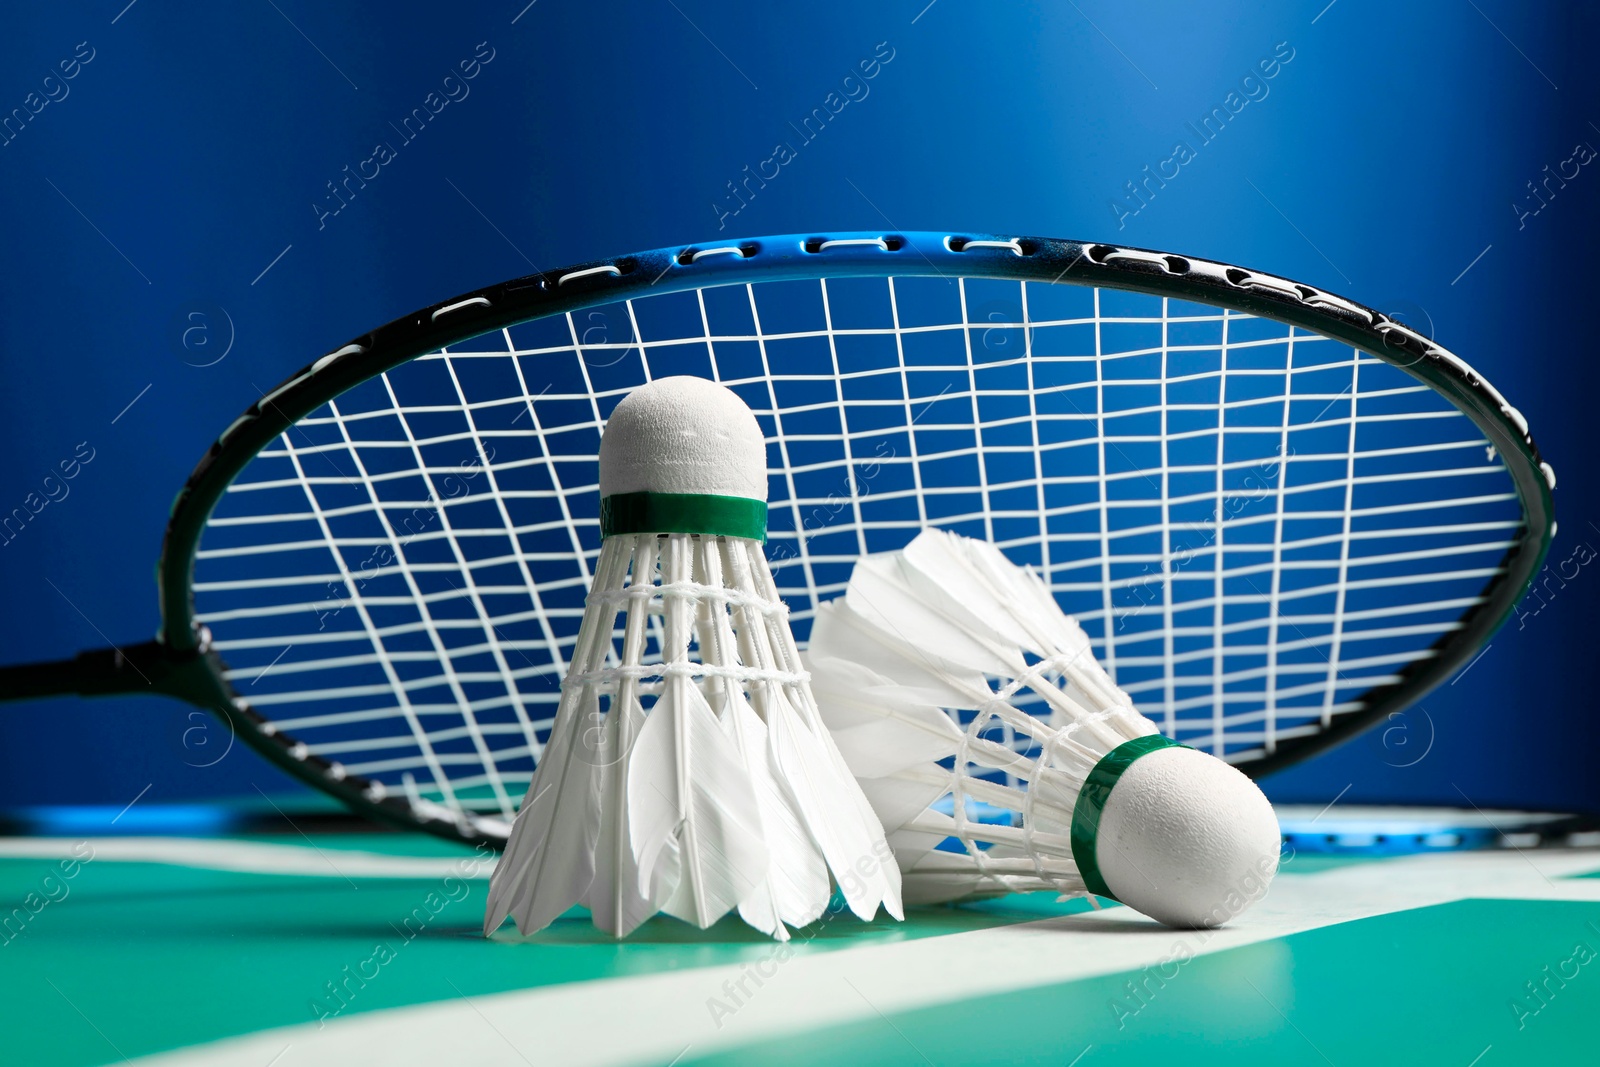 Photo of Feather badminton shuttlecocks and racket on green table against blue background, closeup